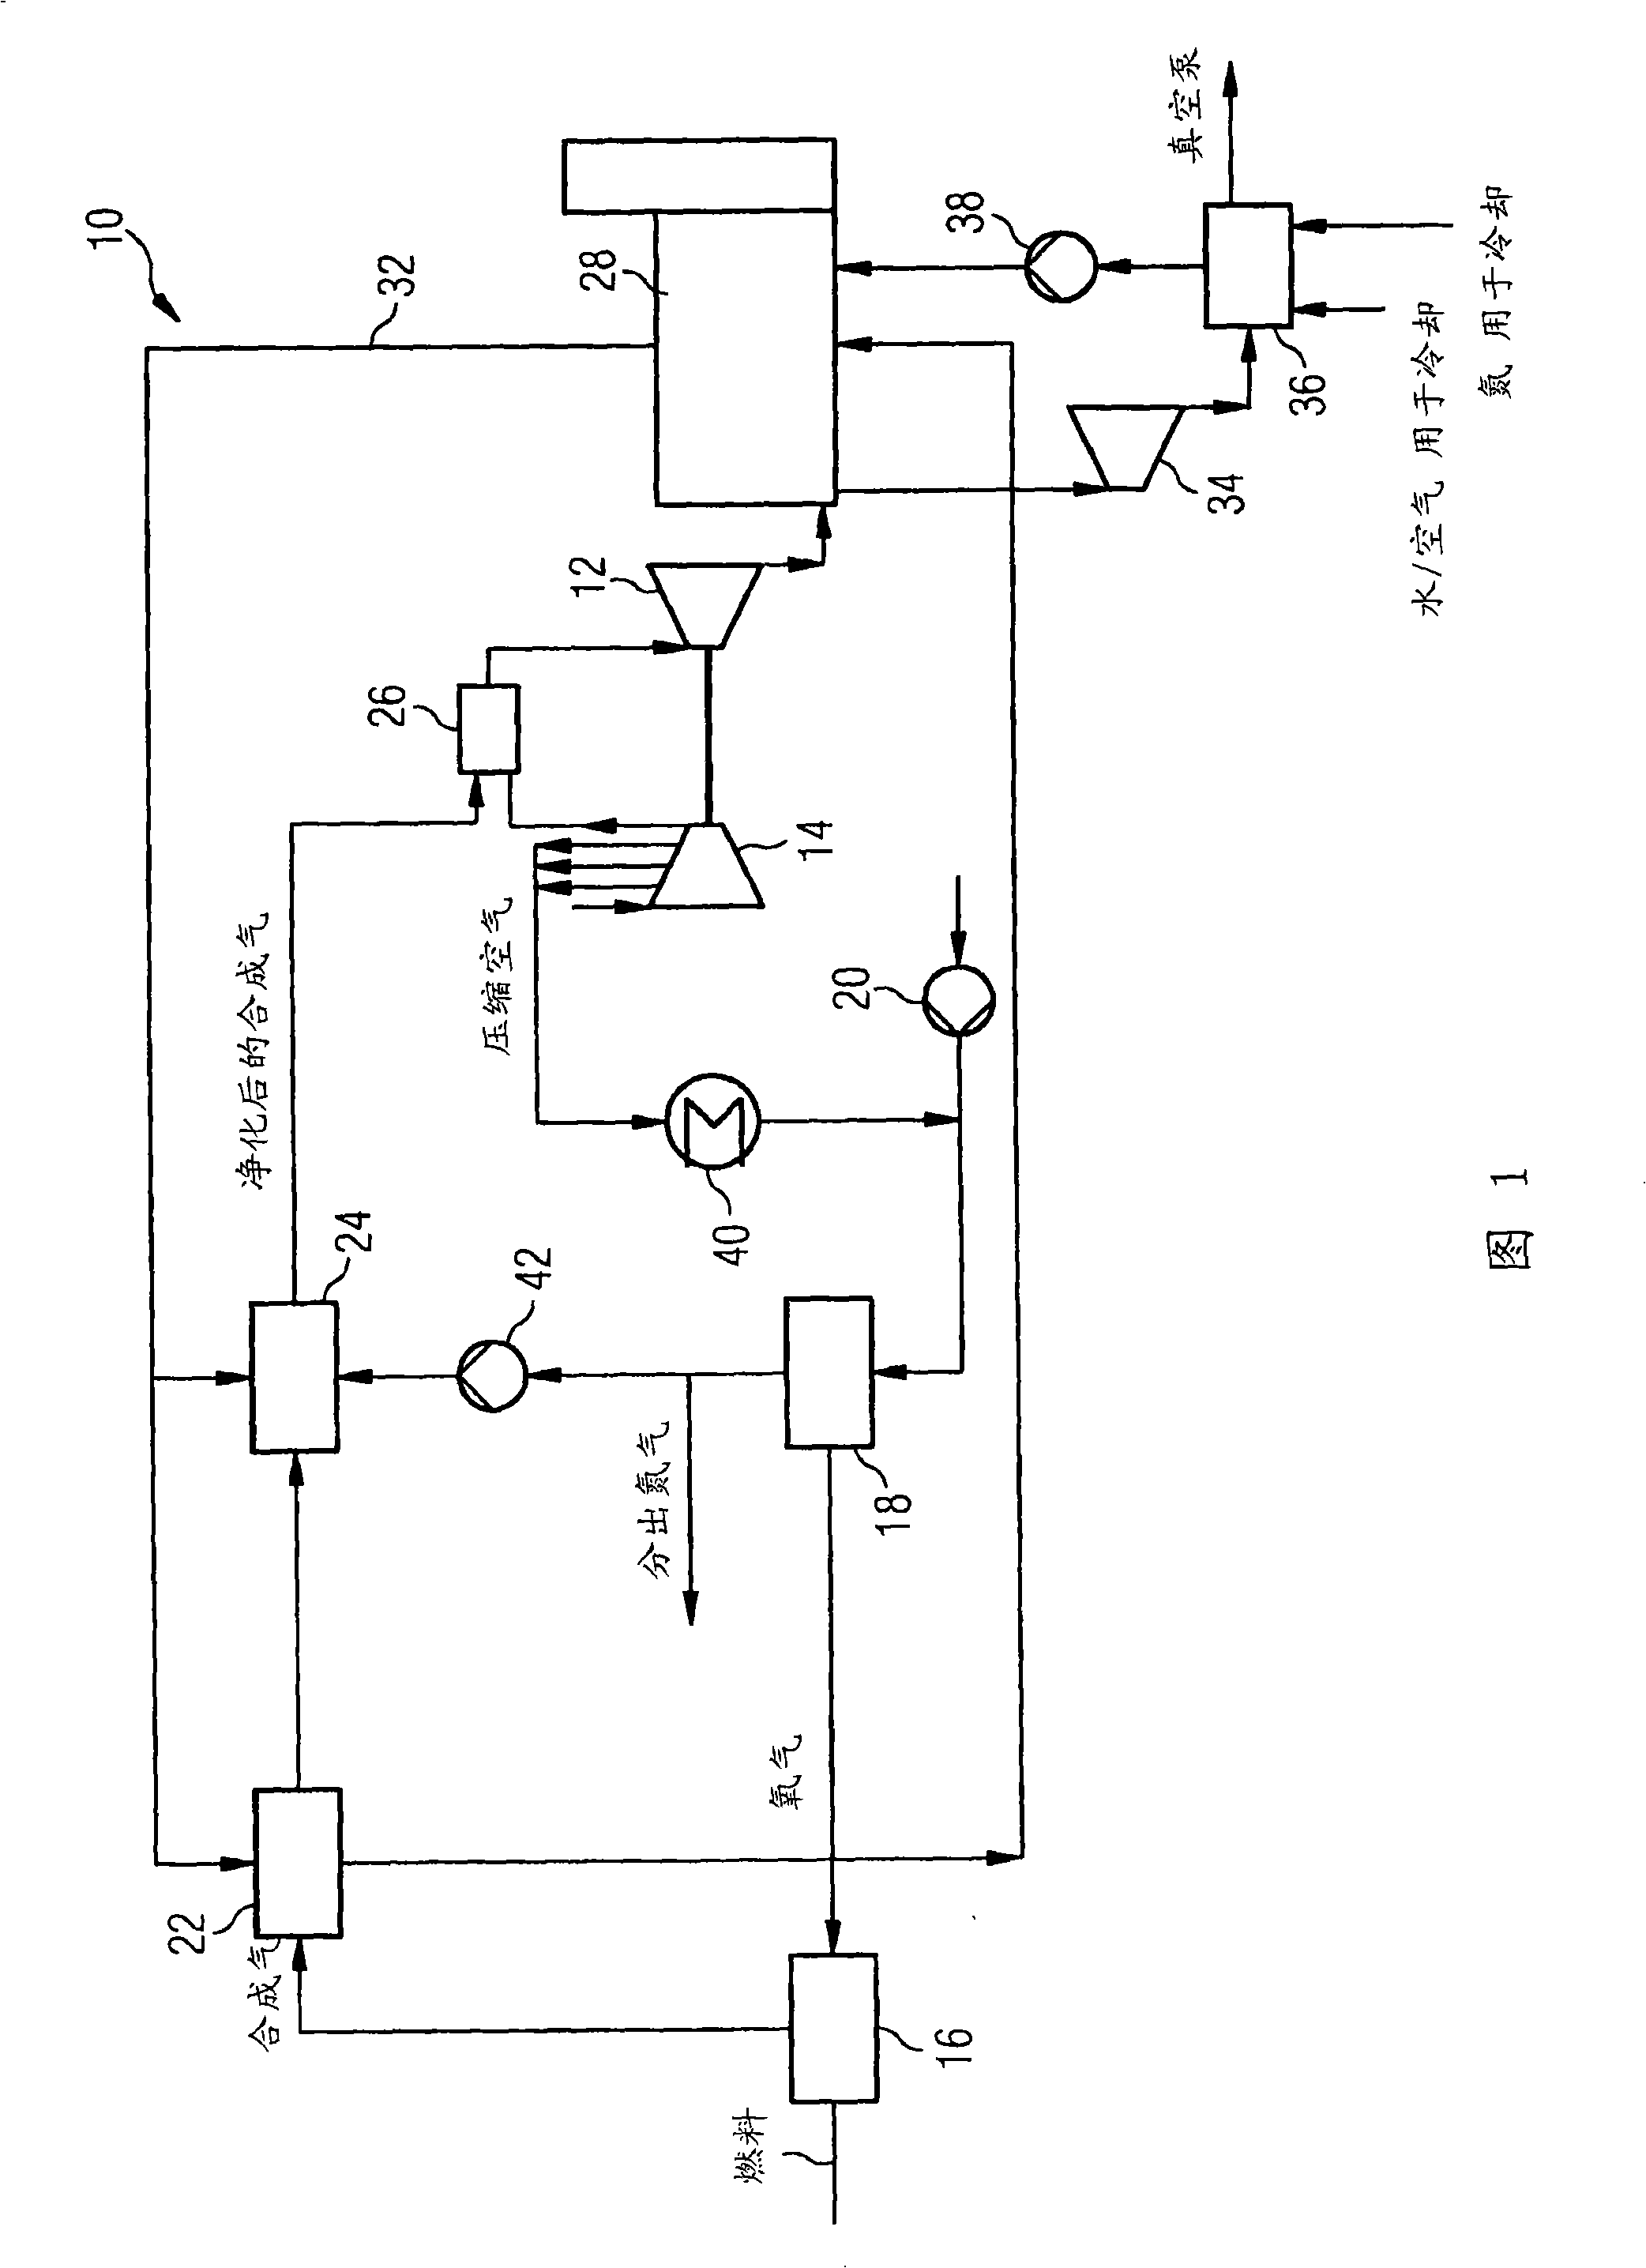 Method for increasing the efficiency of a combined gas/steam power station with integrated gasification combined cycle